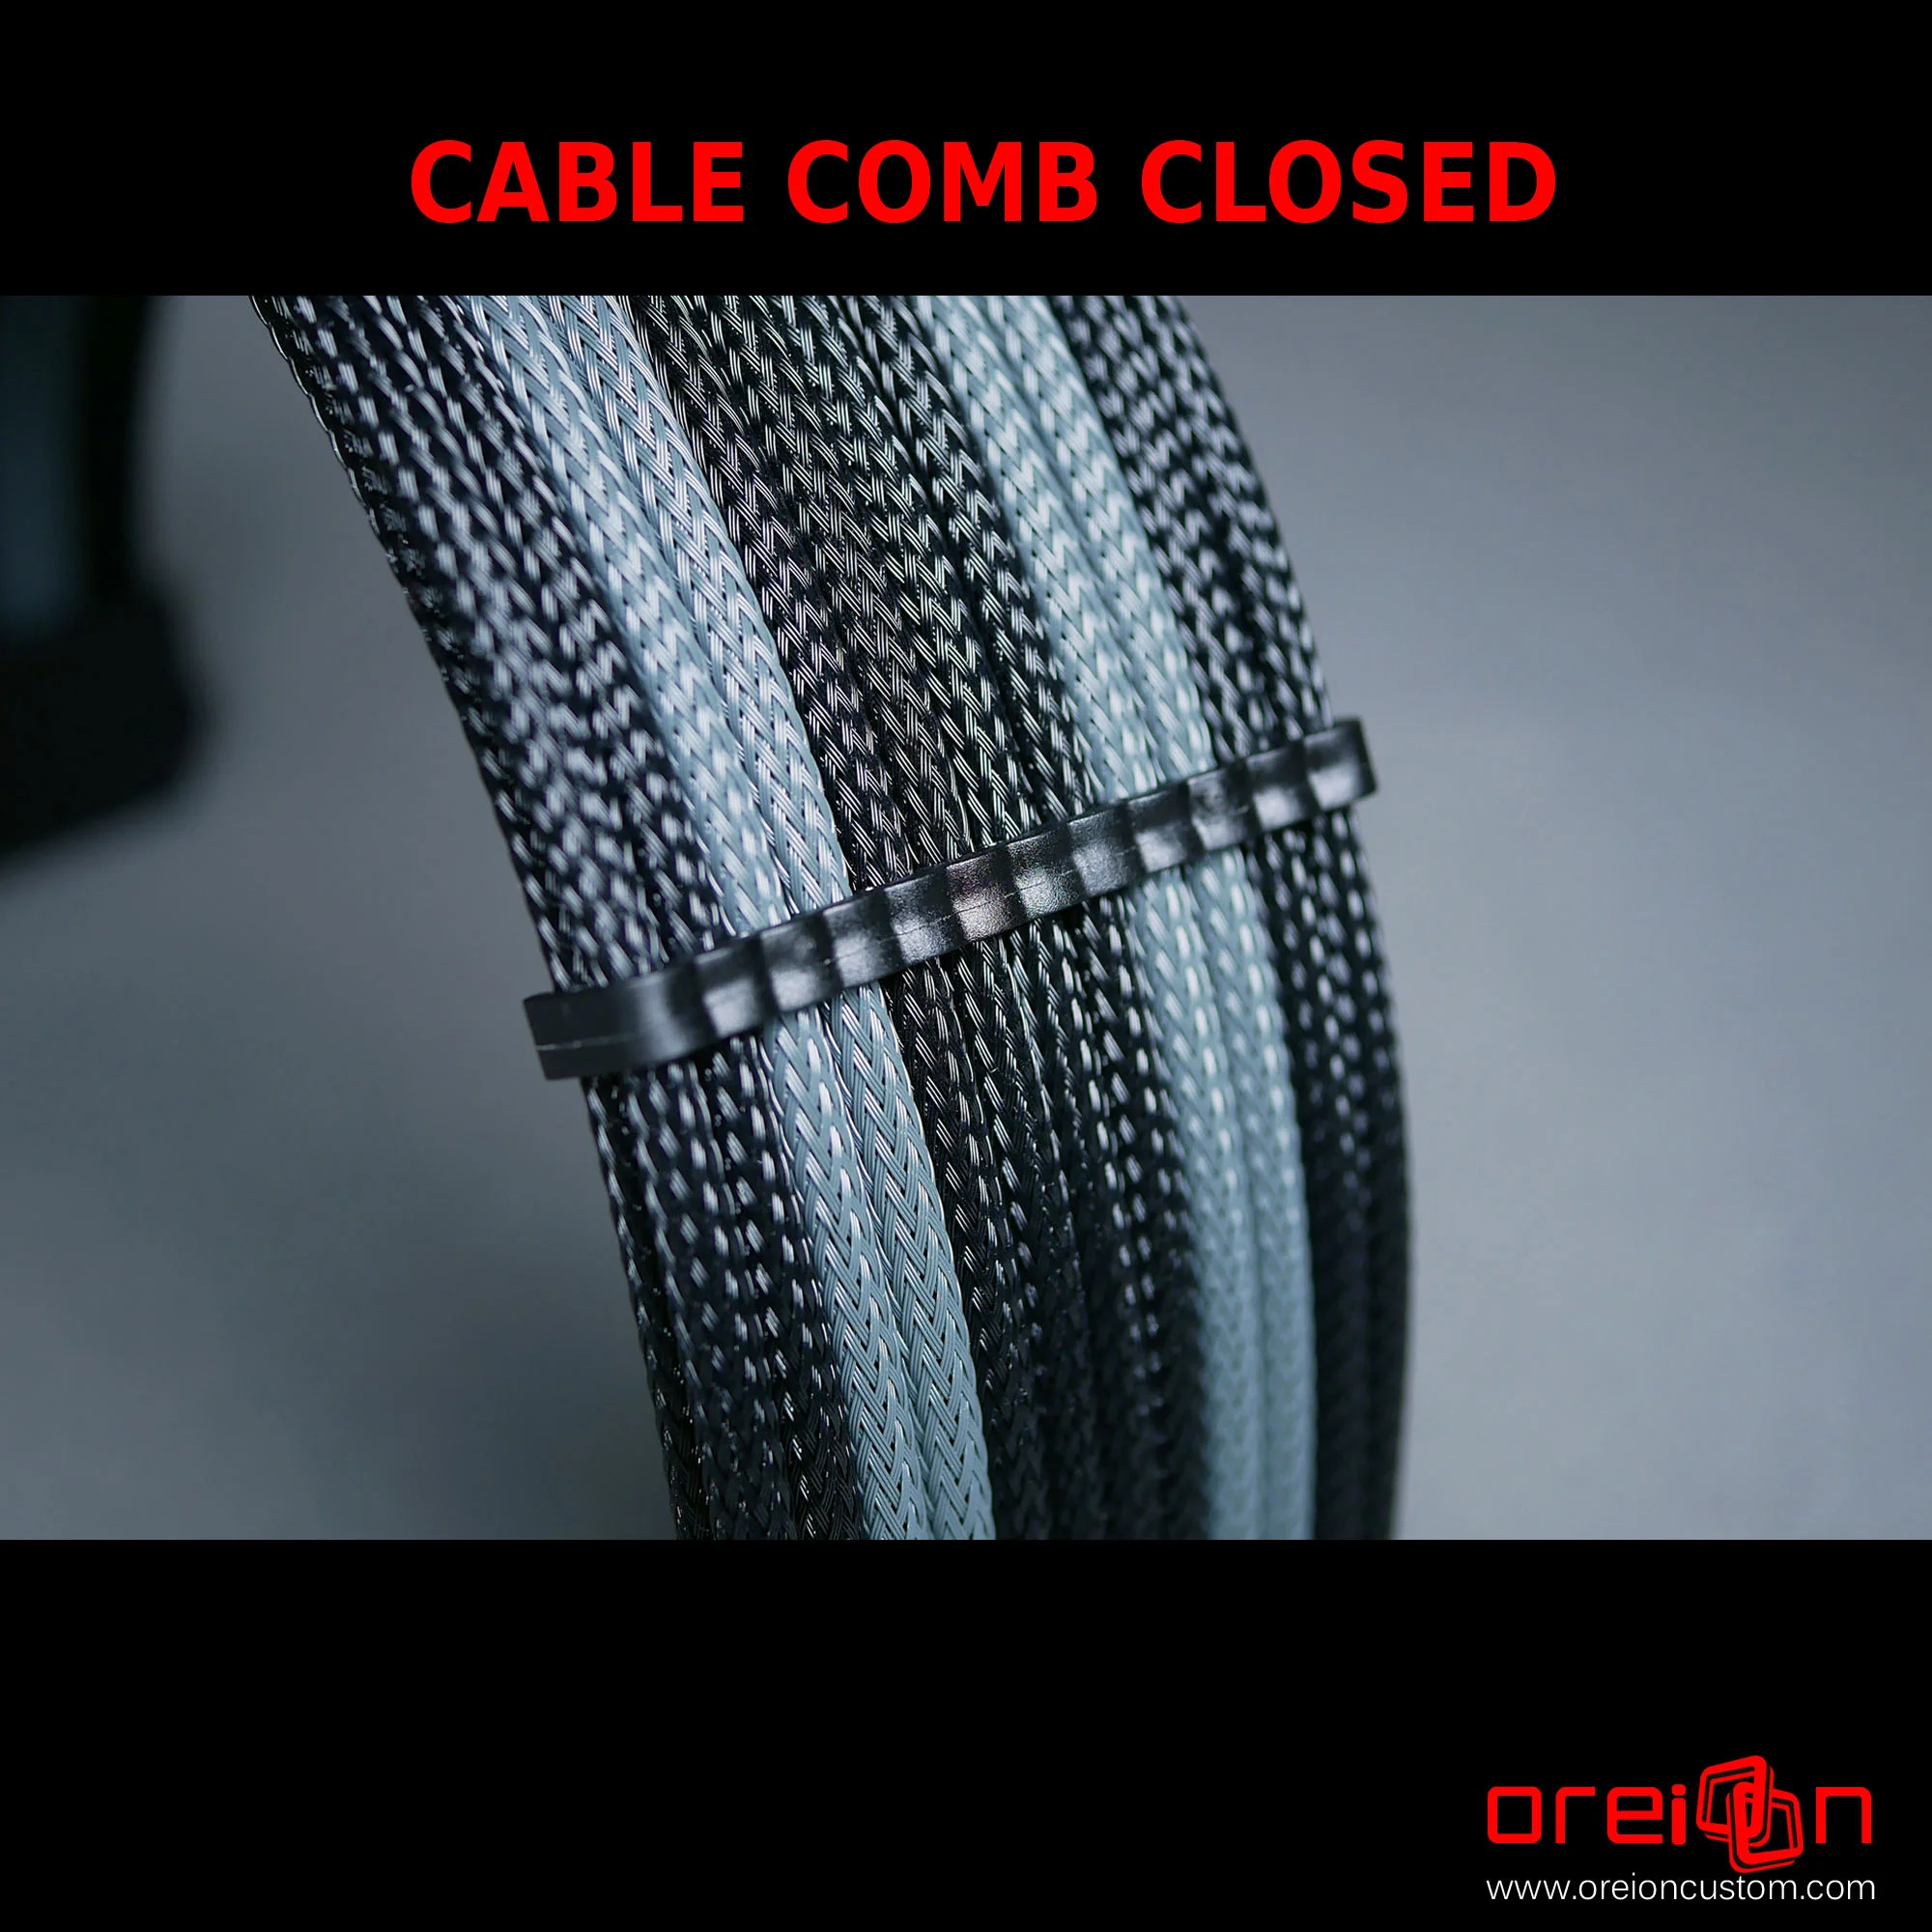 CABLE COMB closed